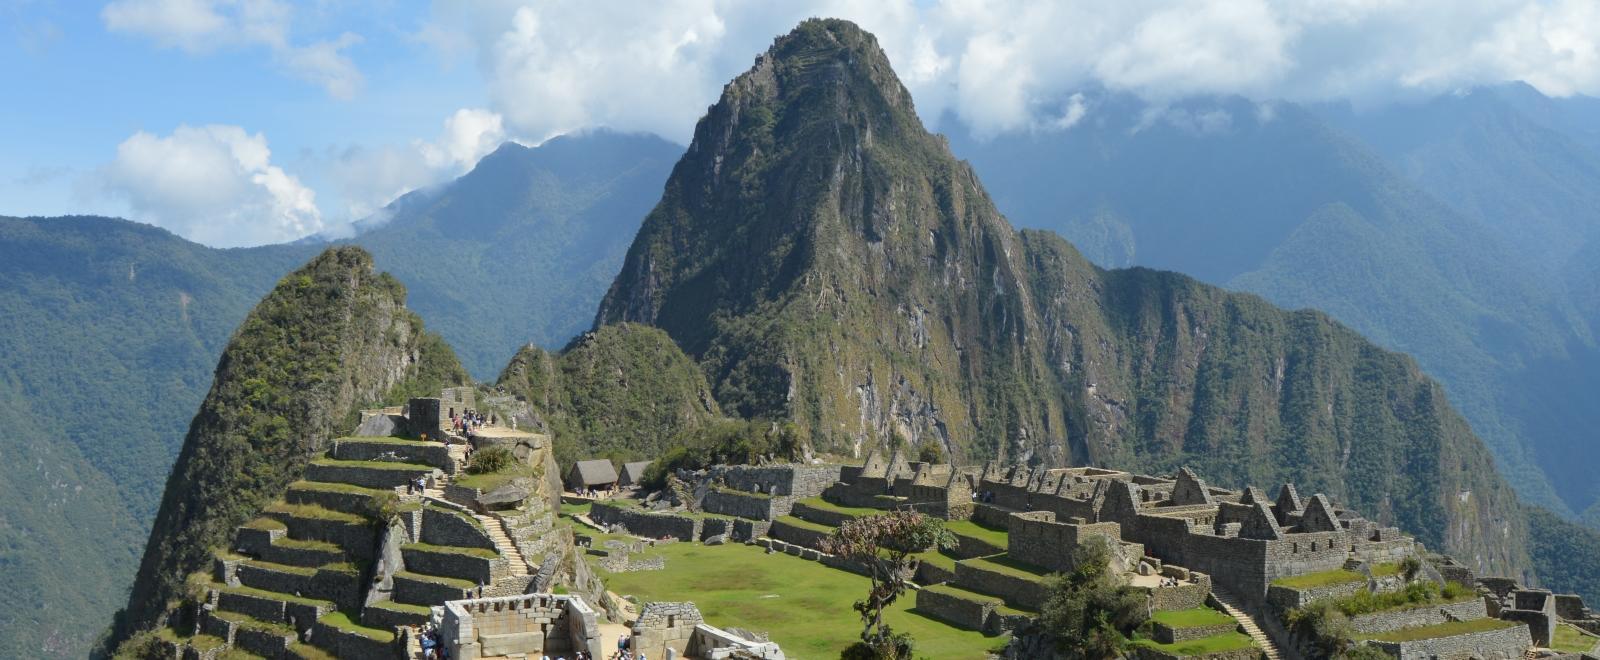 A volunteer in South America takes a photo of Machu Picchu while on a weekend break from his project in Peru.